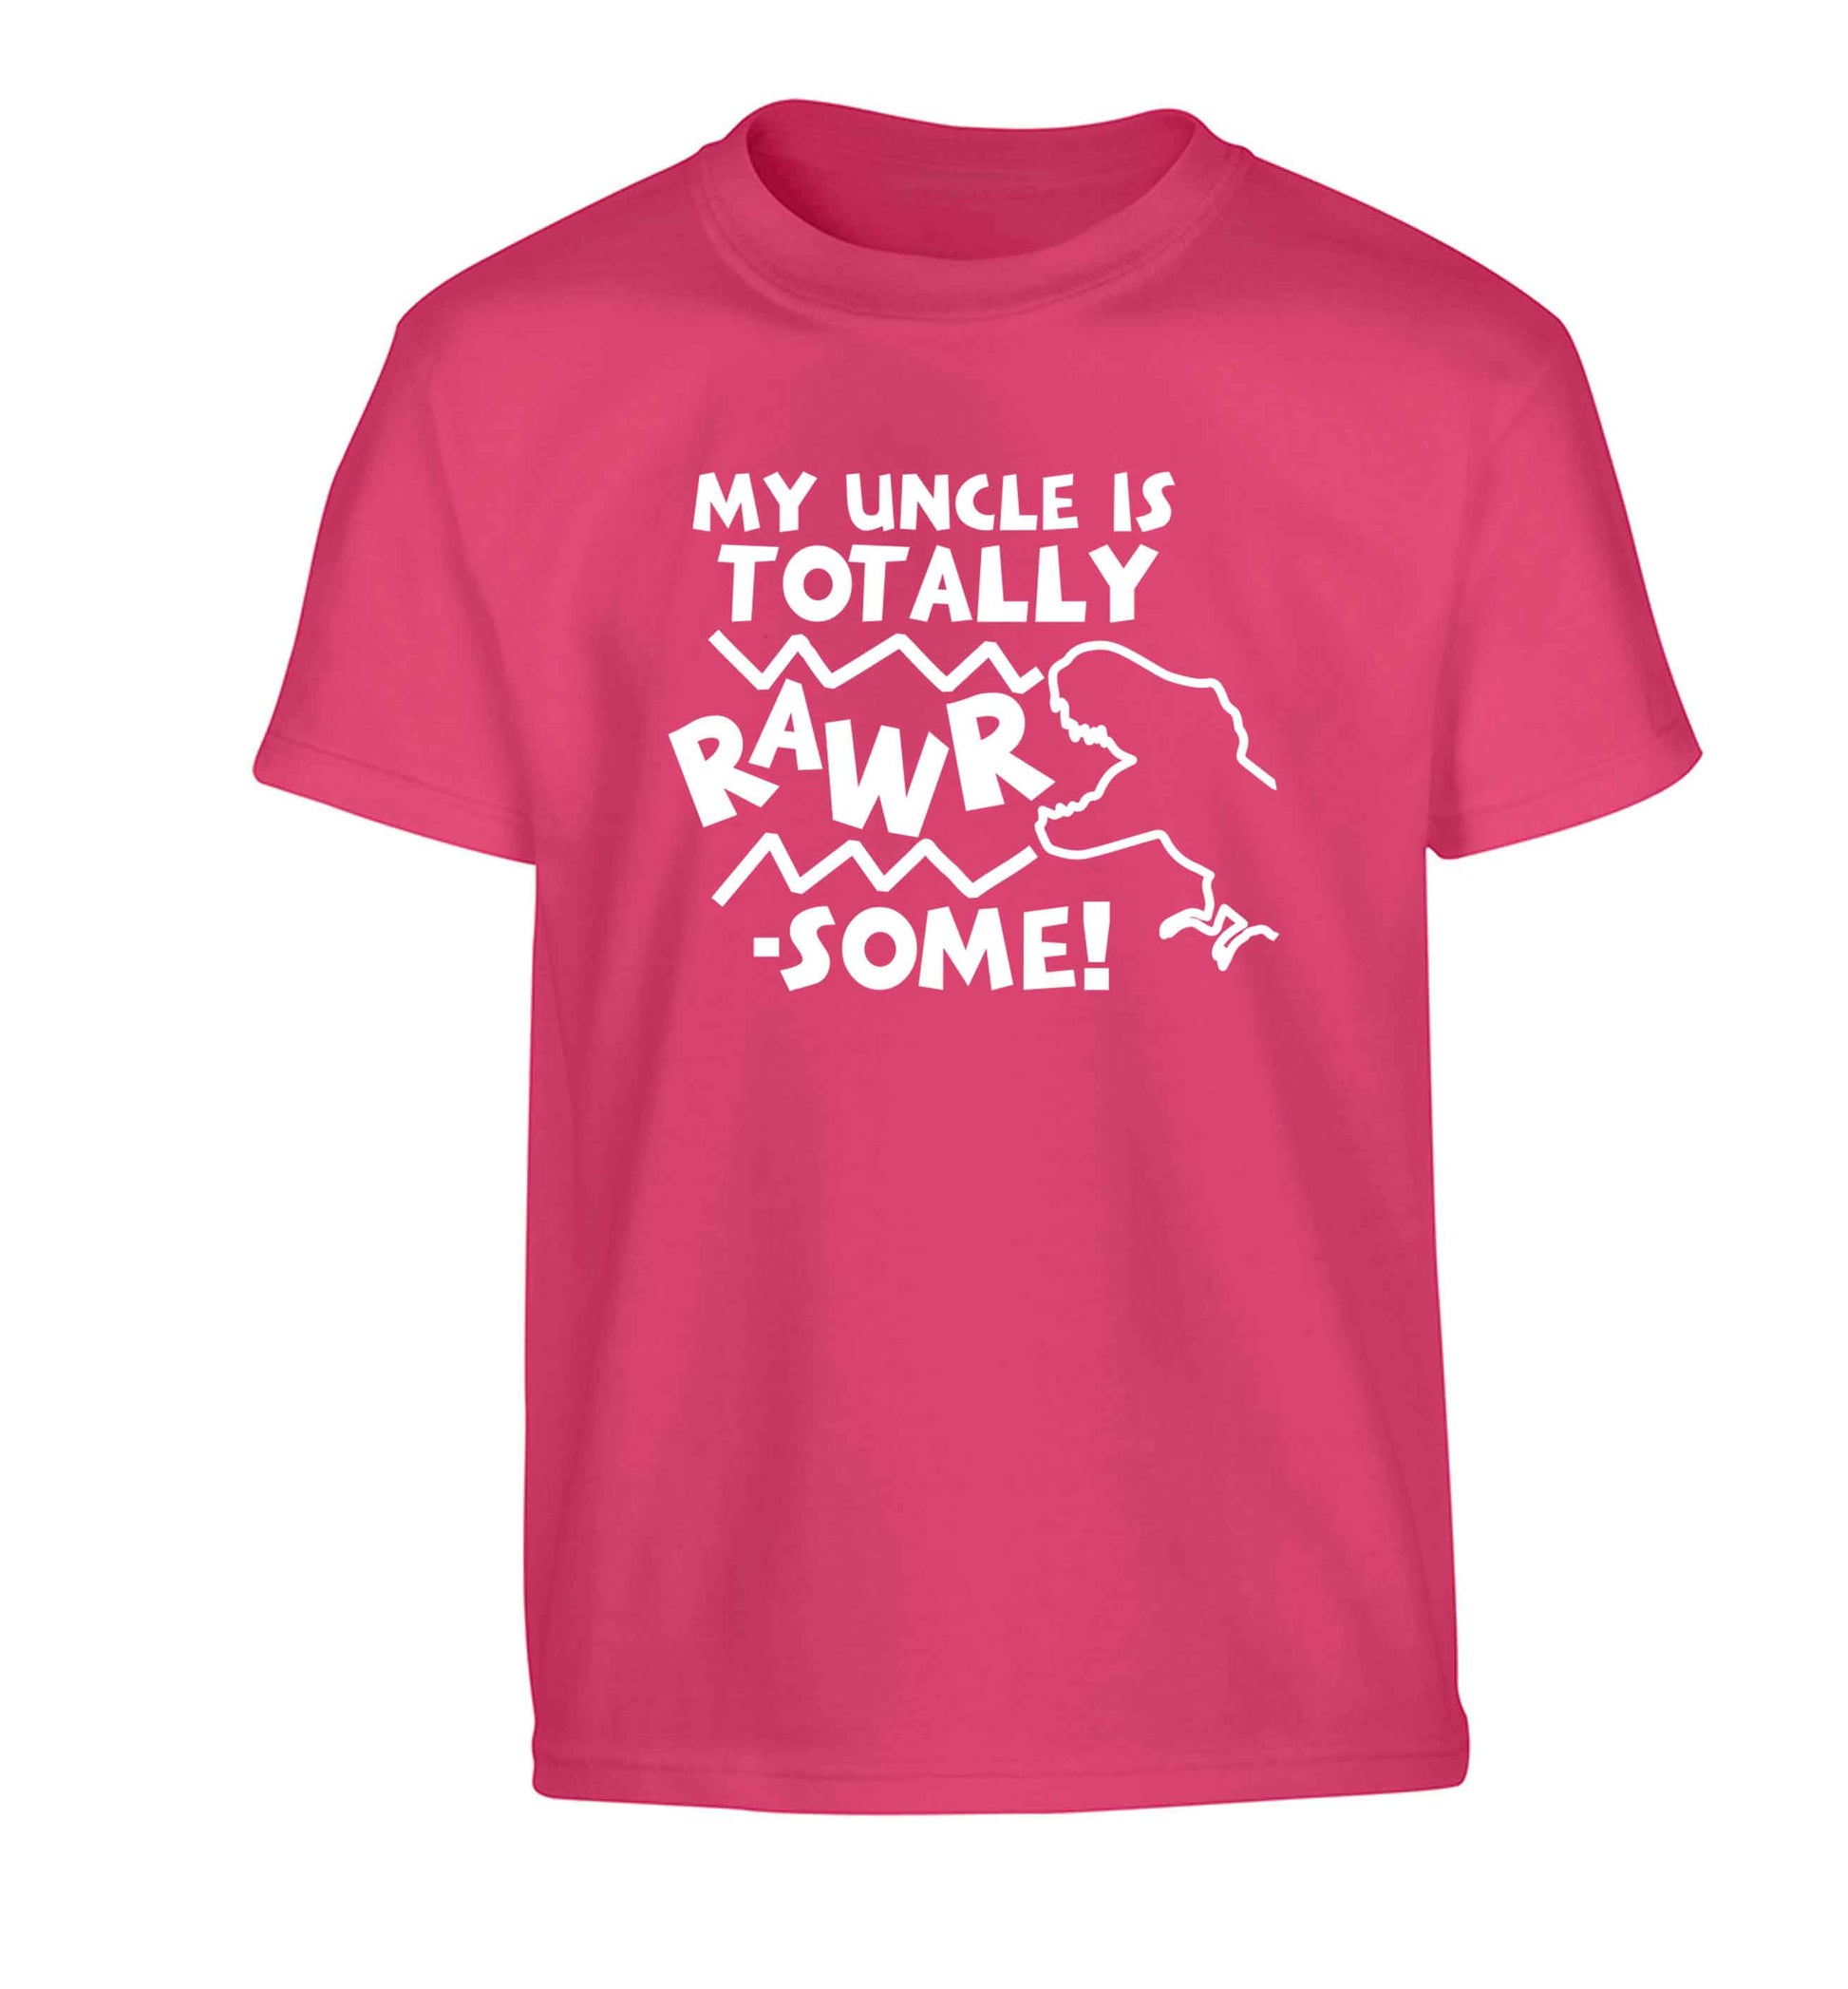 My uncle is totally rawrsome Children's pink Tshirt 12-13 Years